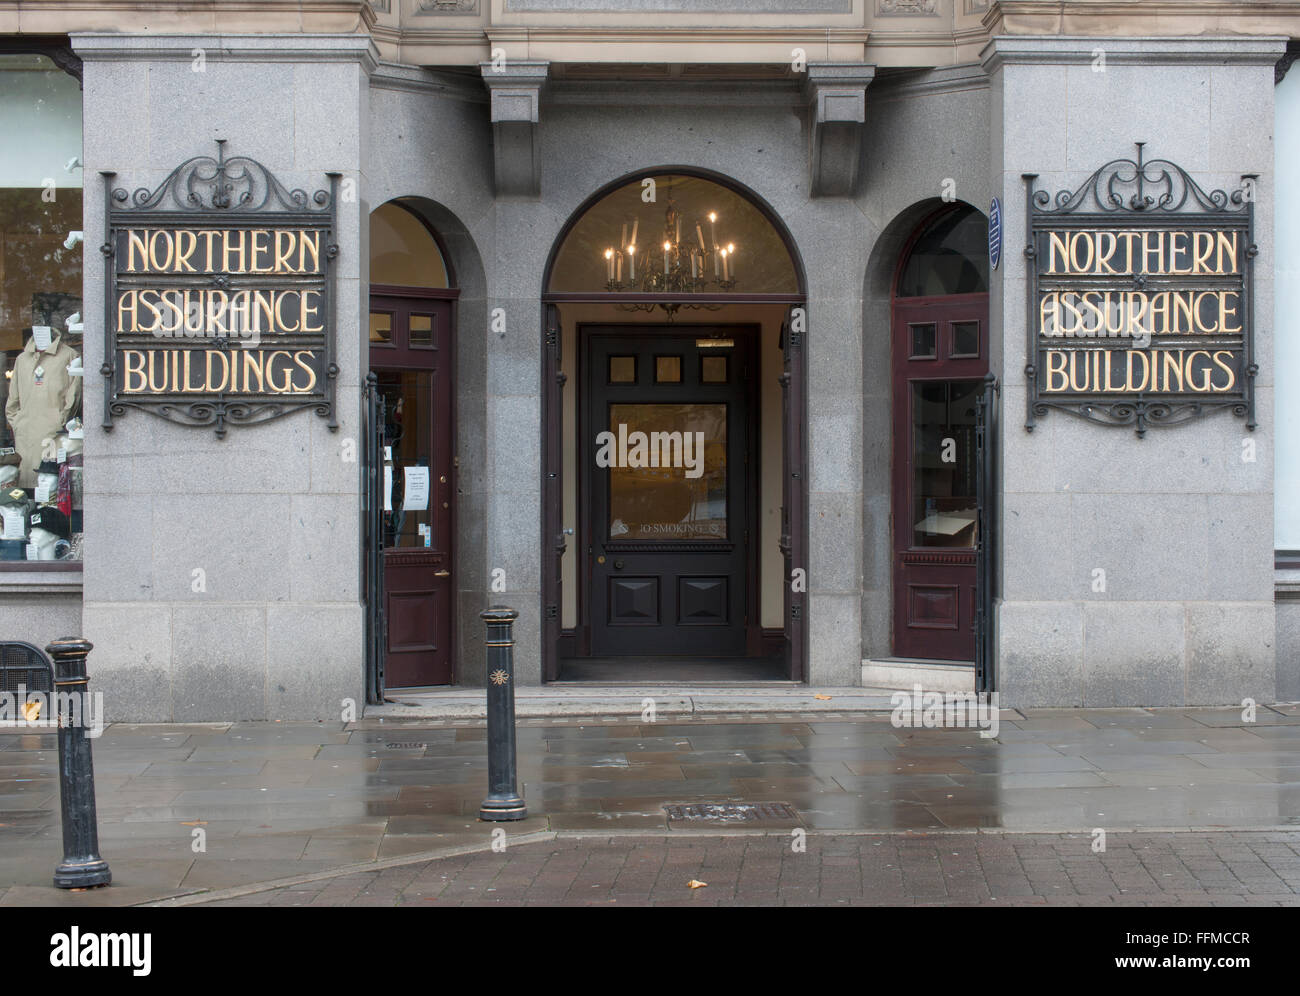 Entrance to Northern Assurance Buildings, Princess Street, Manchester, England, UK Stock Photo